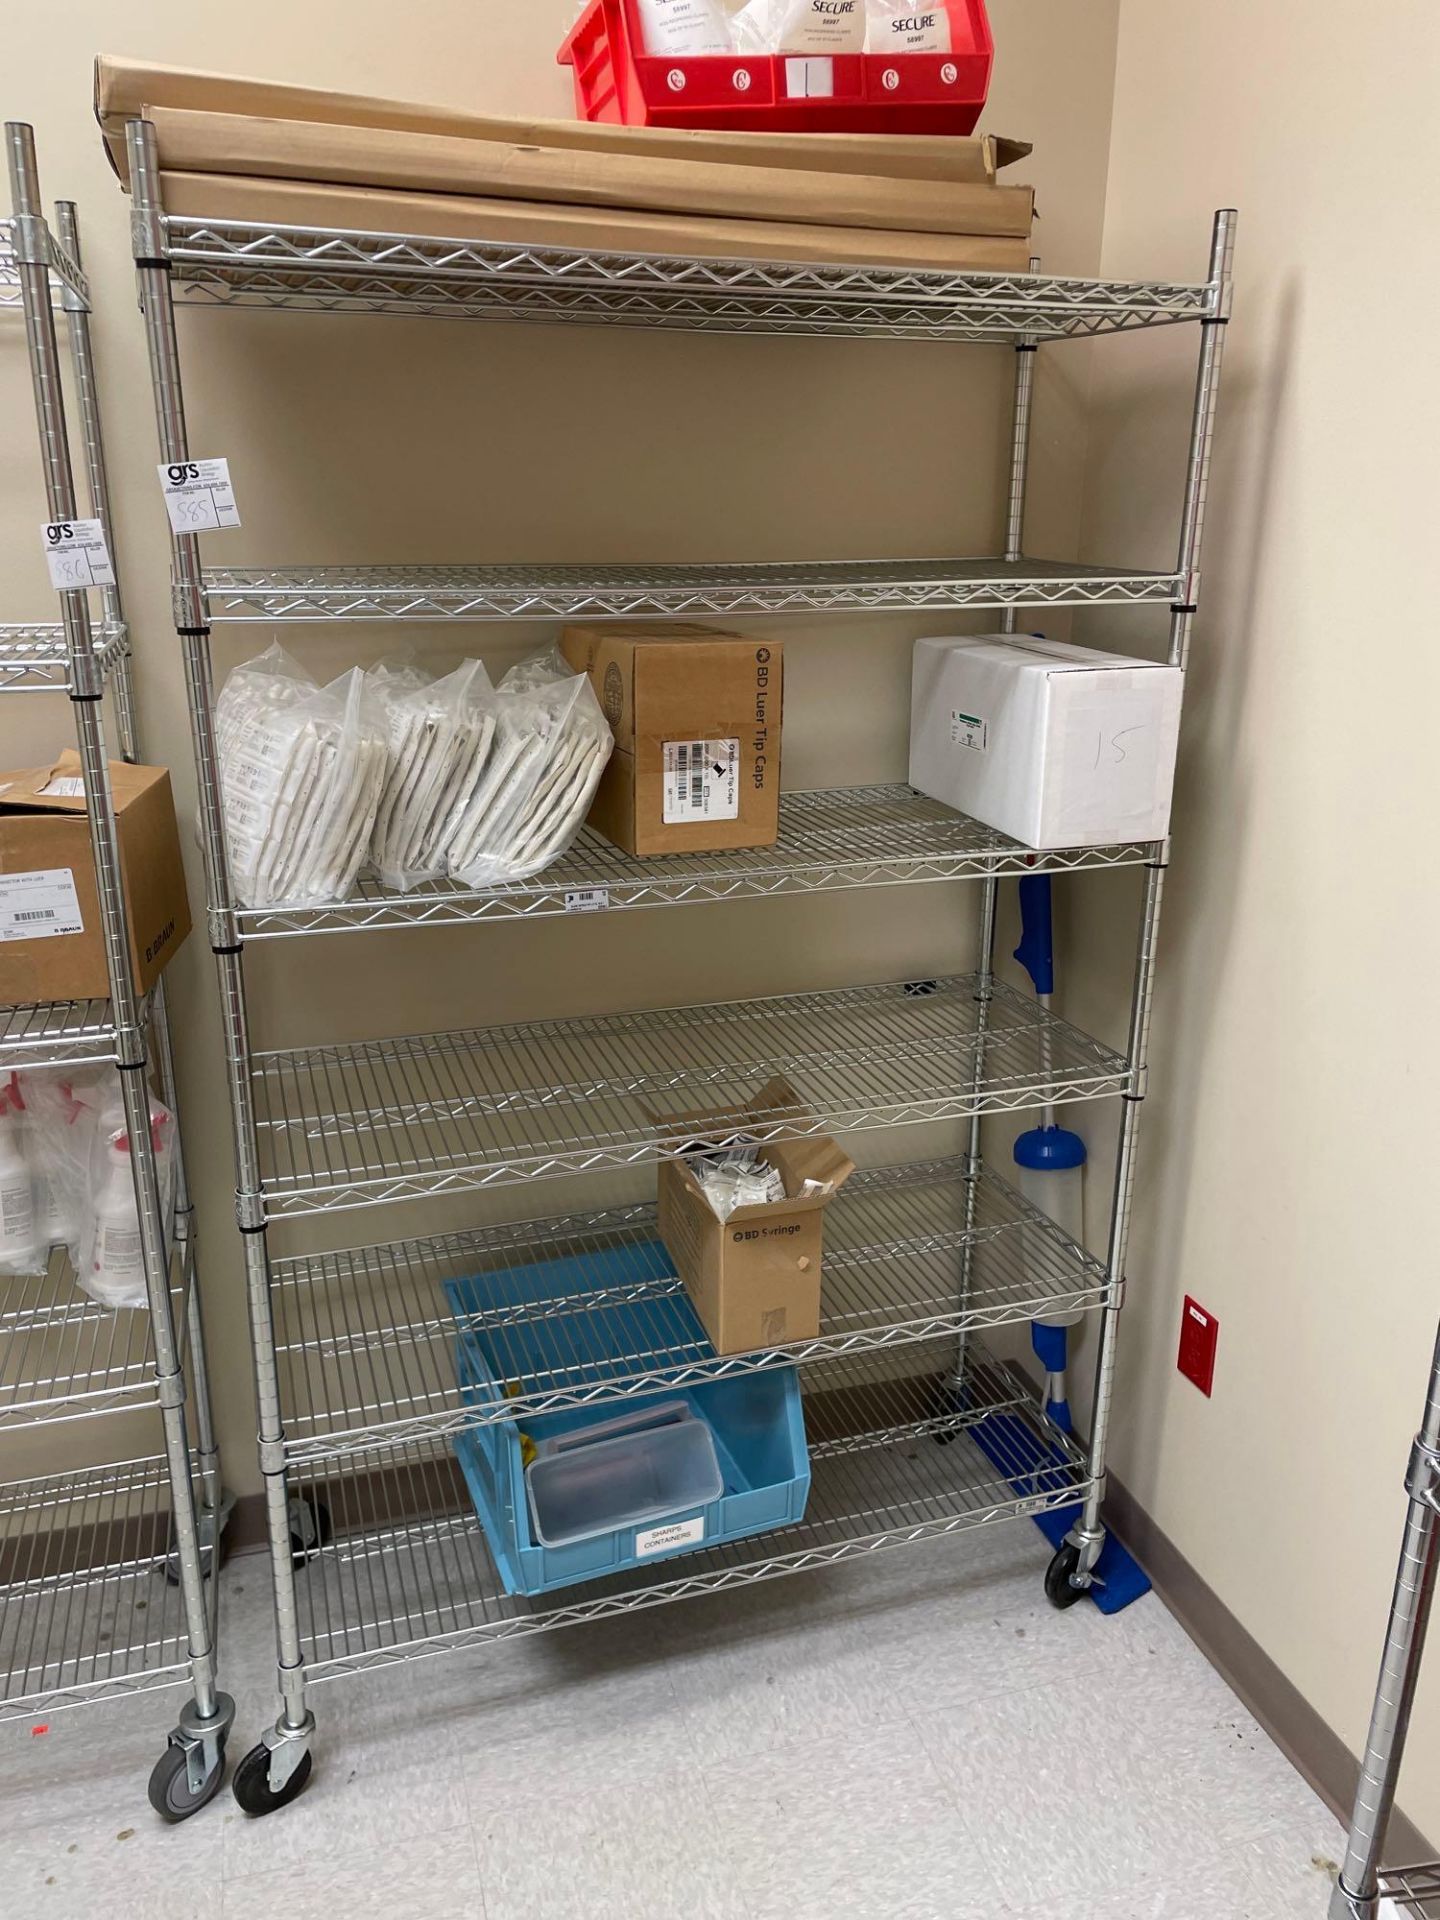 6-Tier Wire Shelving Unit on Casters - Image 2 of 4